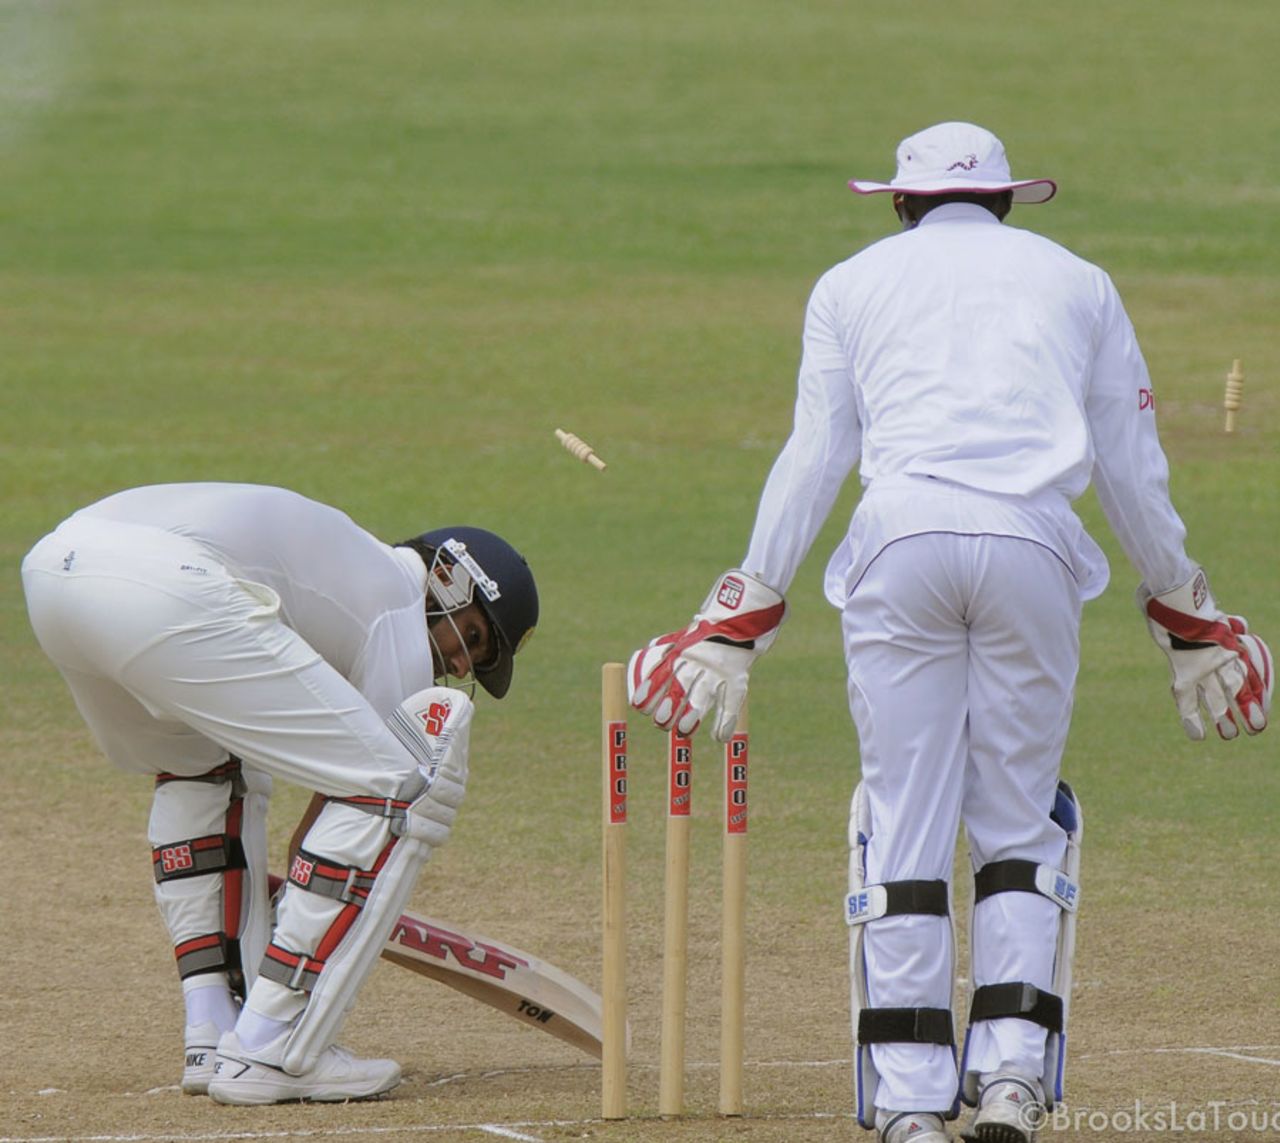 Rohit Sharma was bowled by a ball that kept low, West Indies A v India A, 2nd unofficial Test, St Vincent, 4th day, June 12, 2012